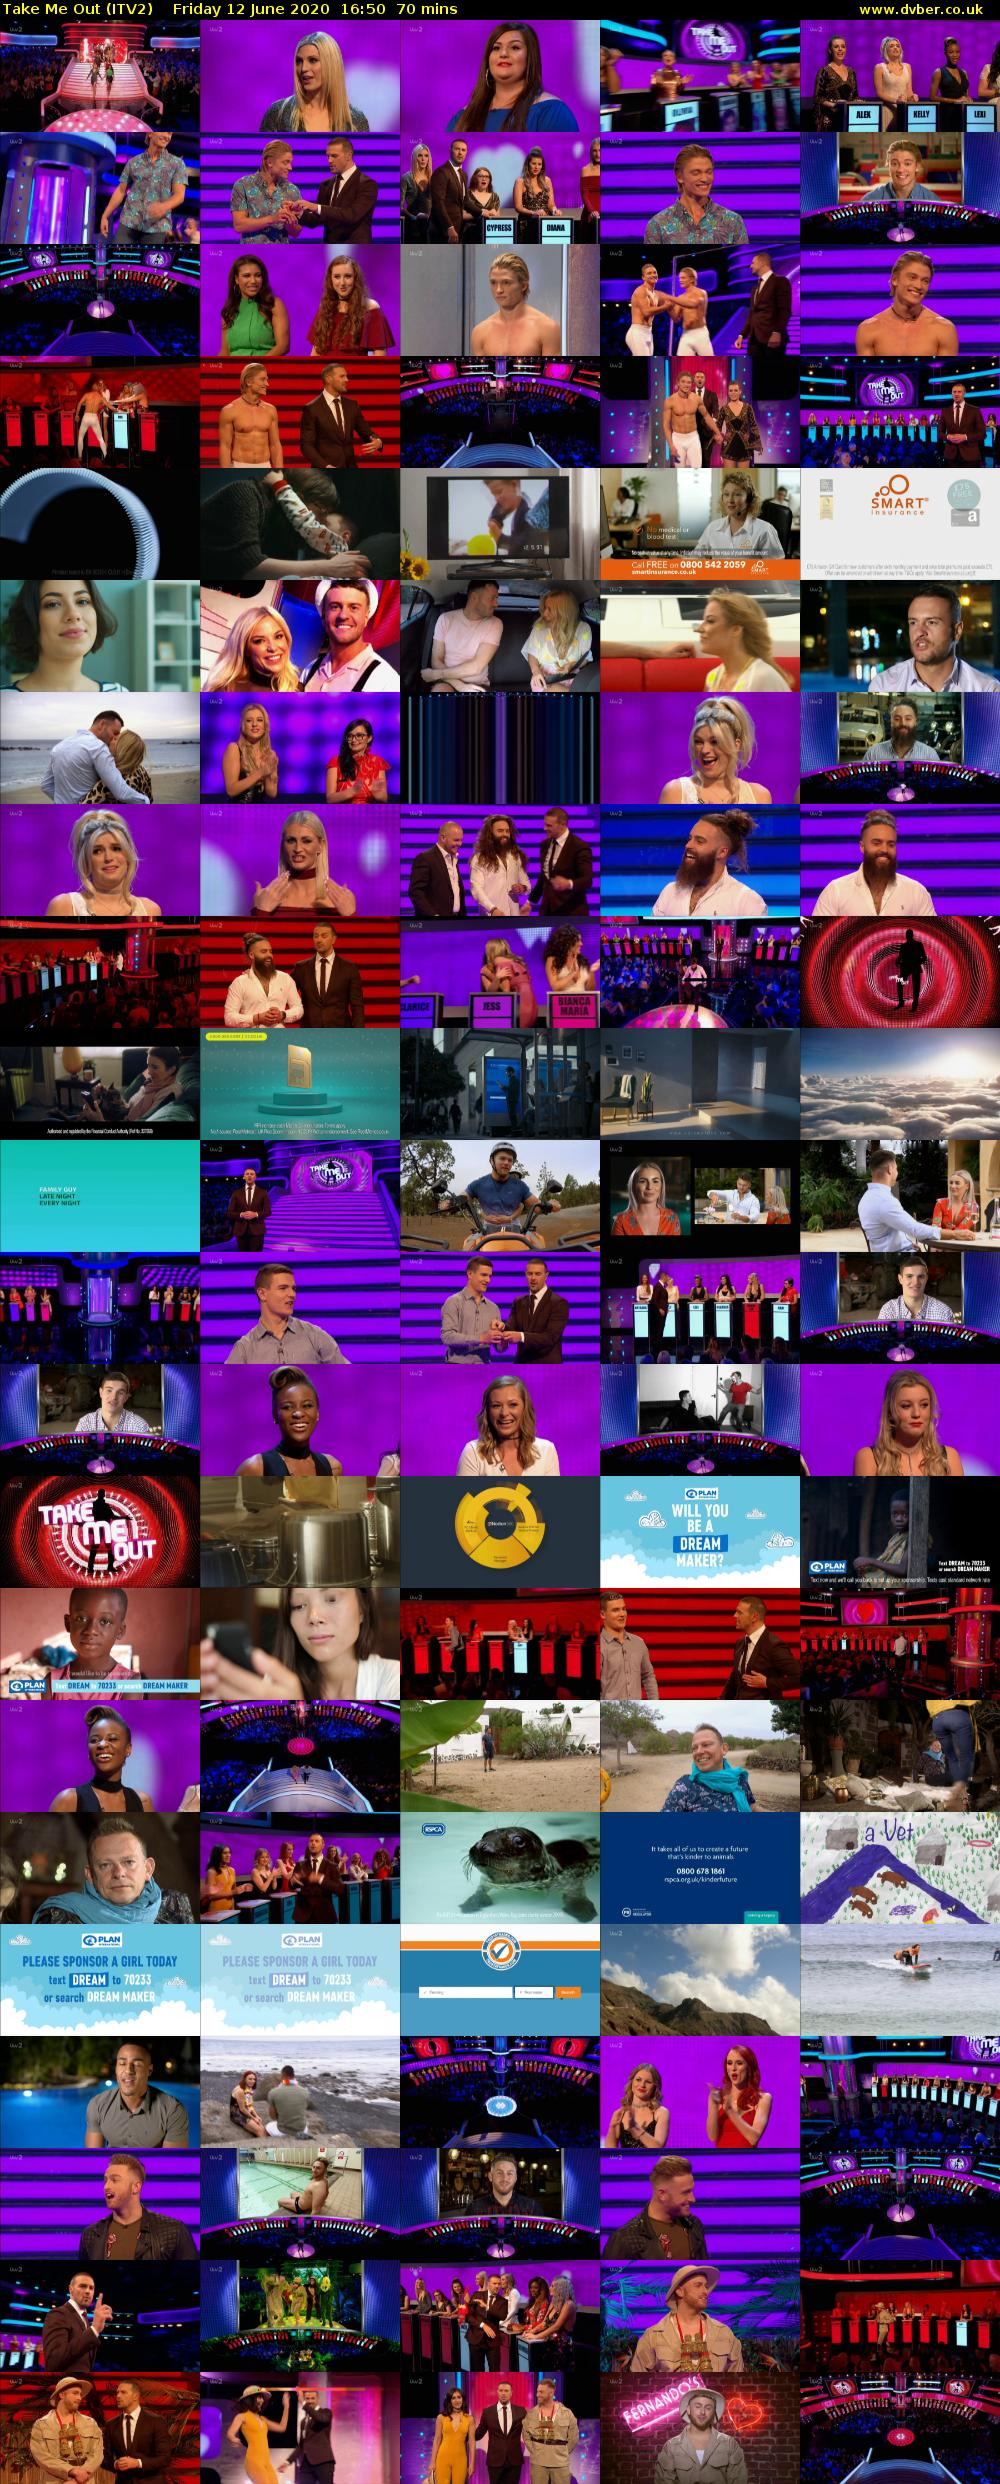 Take Me Out (ITV2) Friday 12 June 2020 16:50 - 18:00